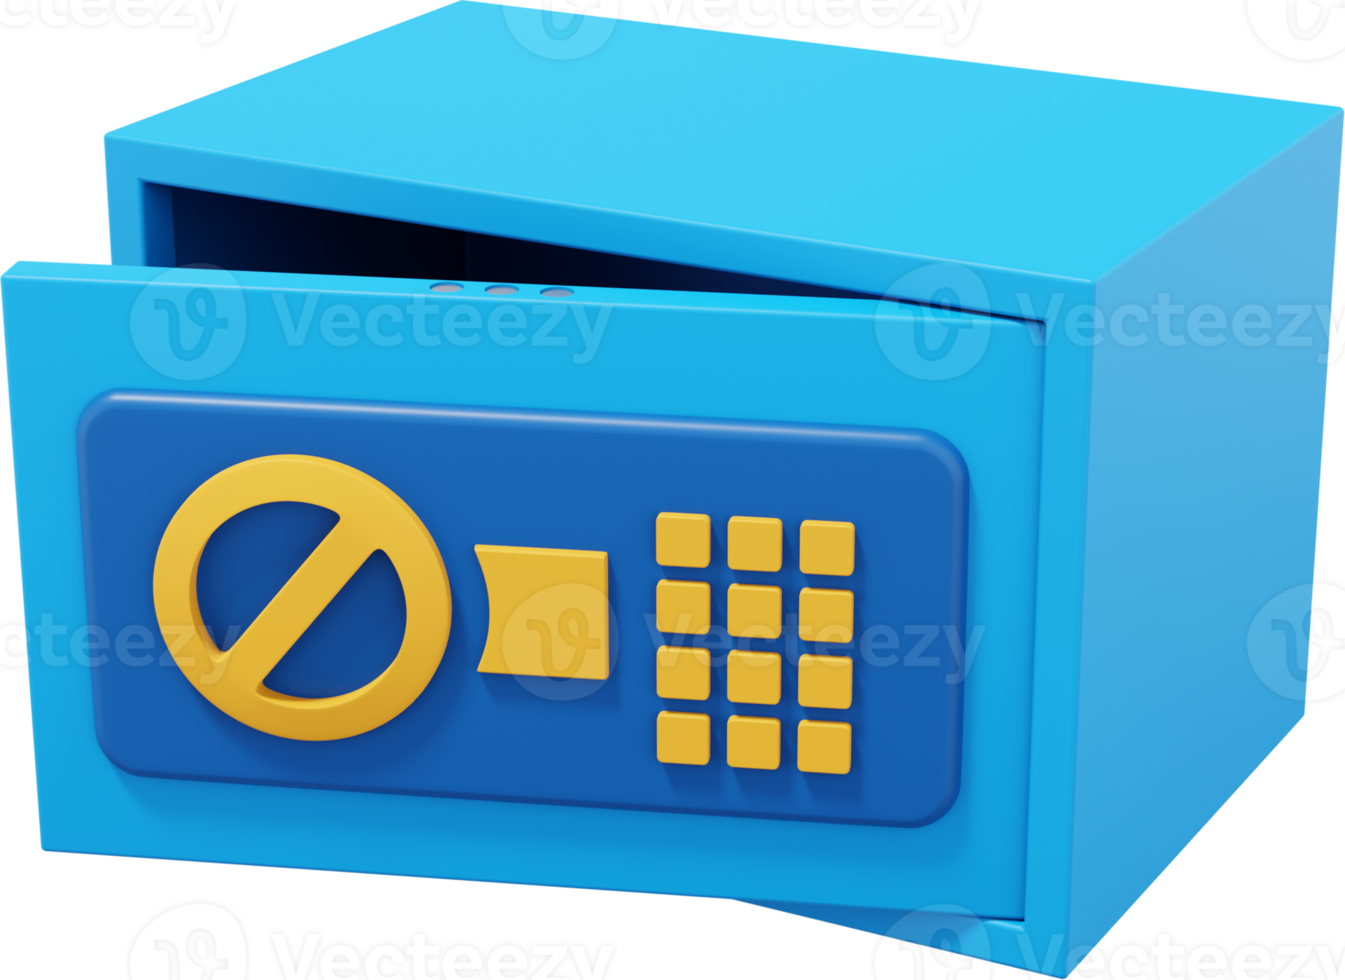 Modern safe with code lock. Blue open storage. PNG icon on transparent background. 3D rendering.